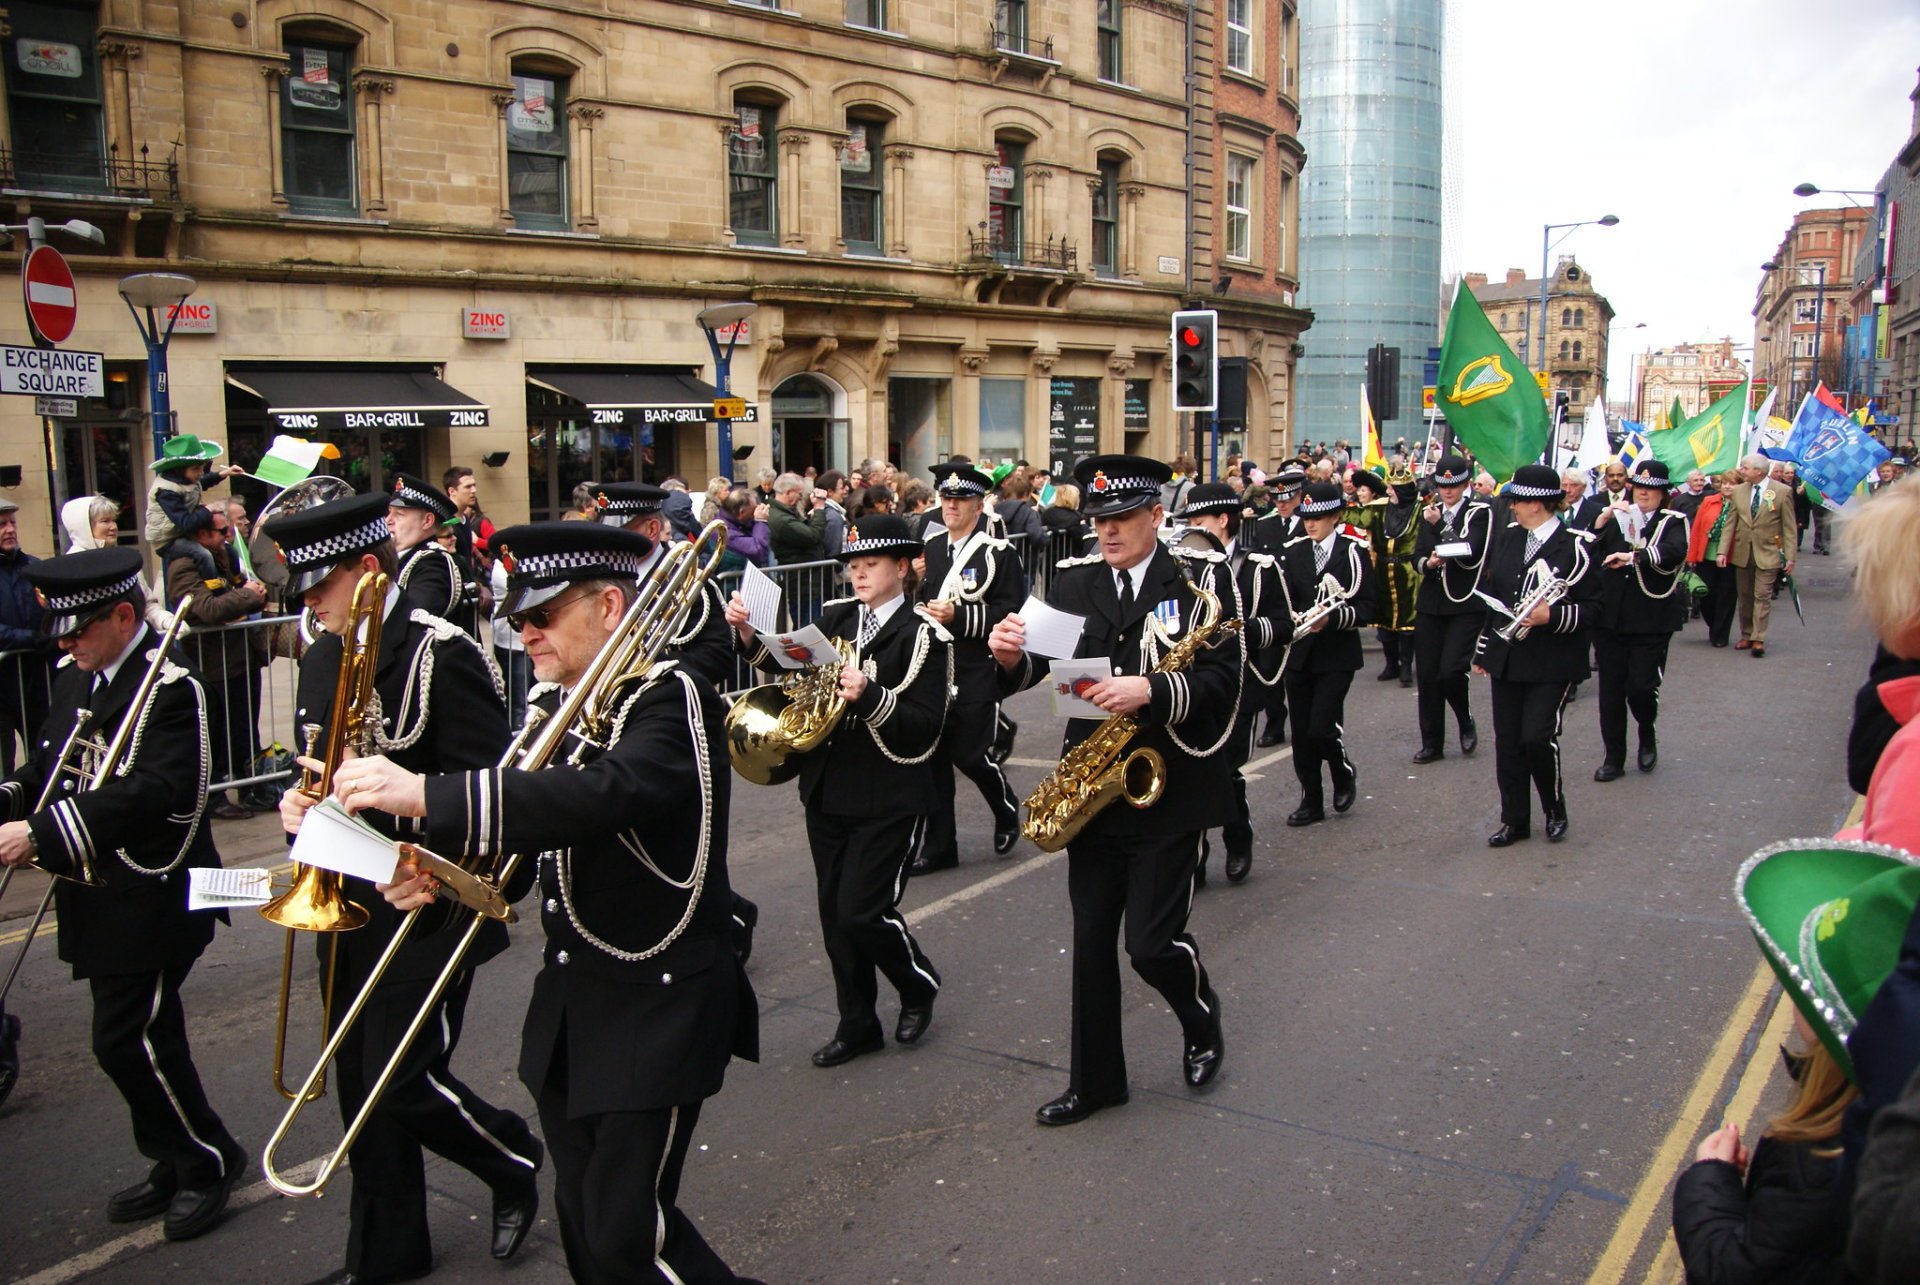 St. Patrick's Day in Manchester